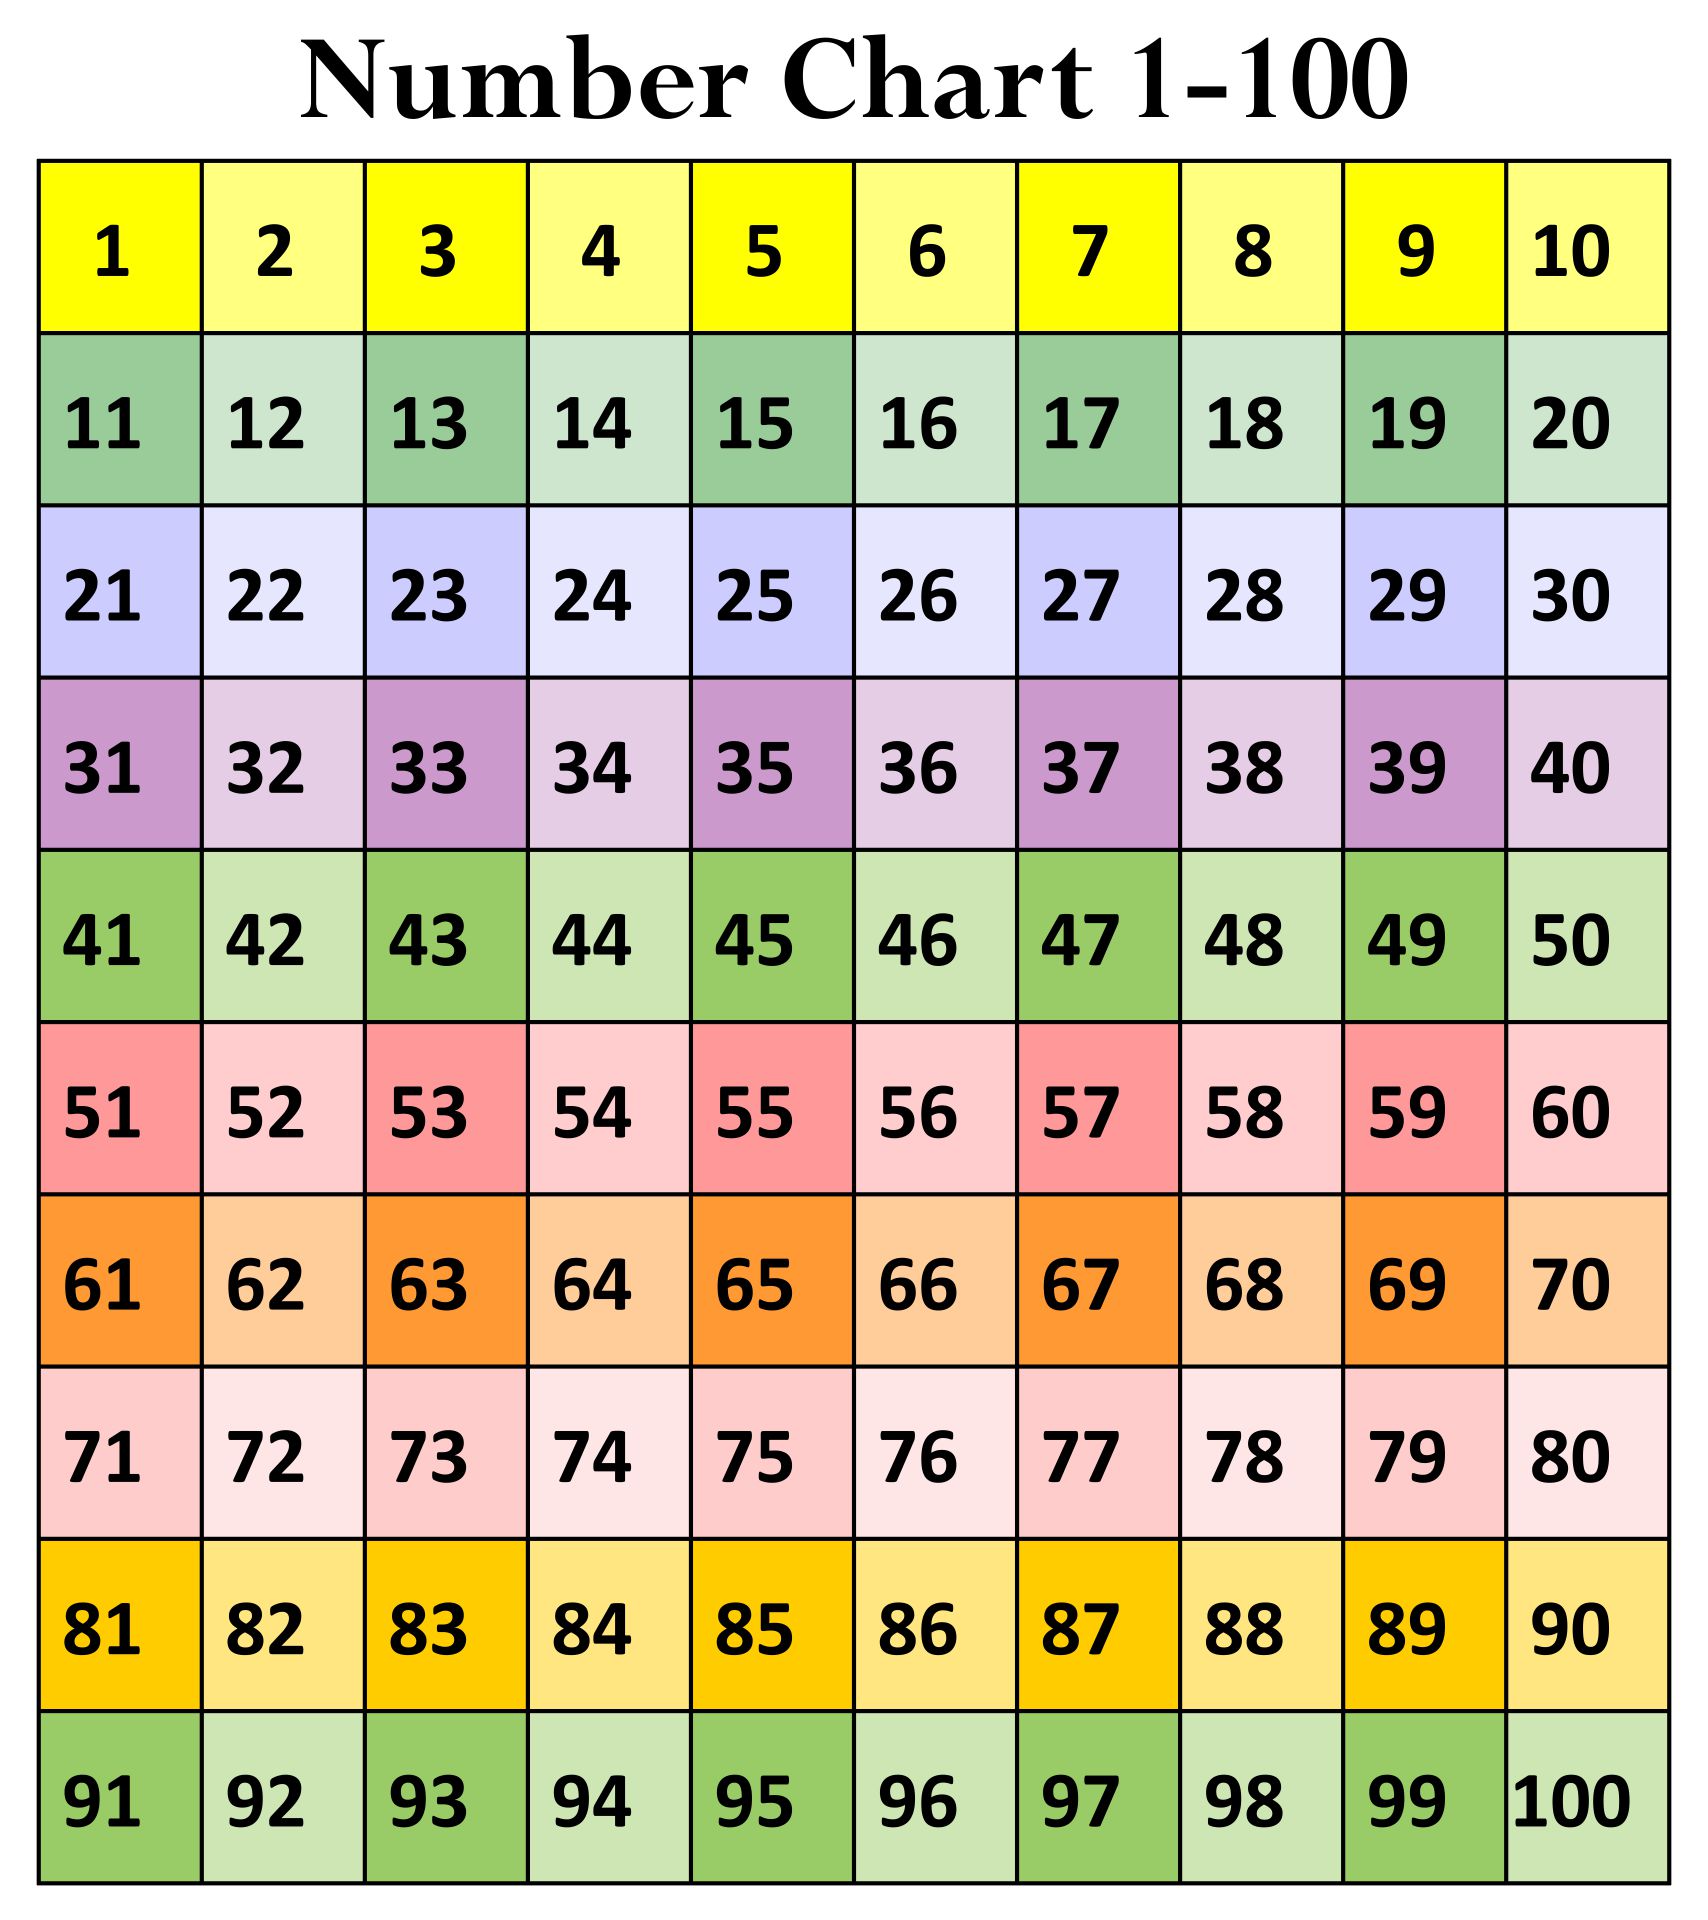 6-best-images-of-1-100-chart-printable-printable-number-chart-1-100